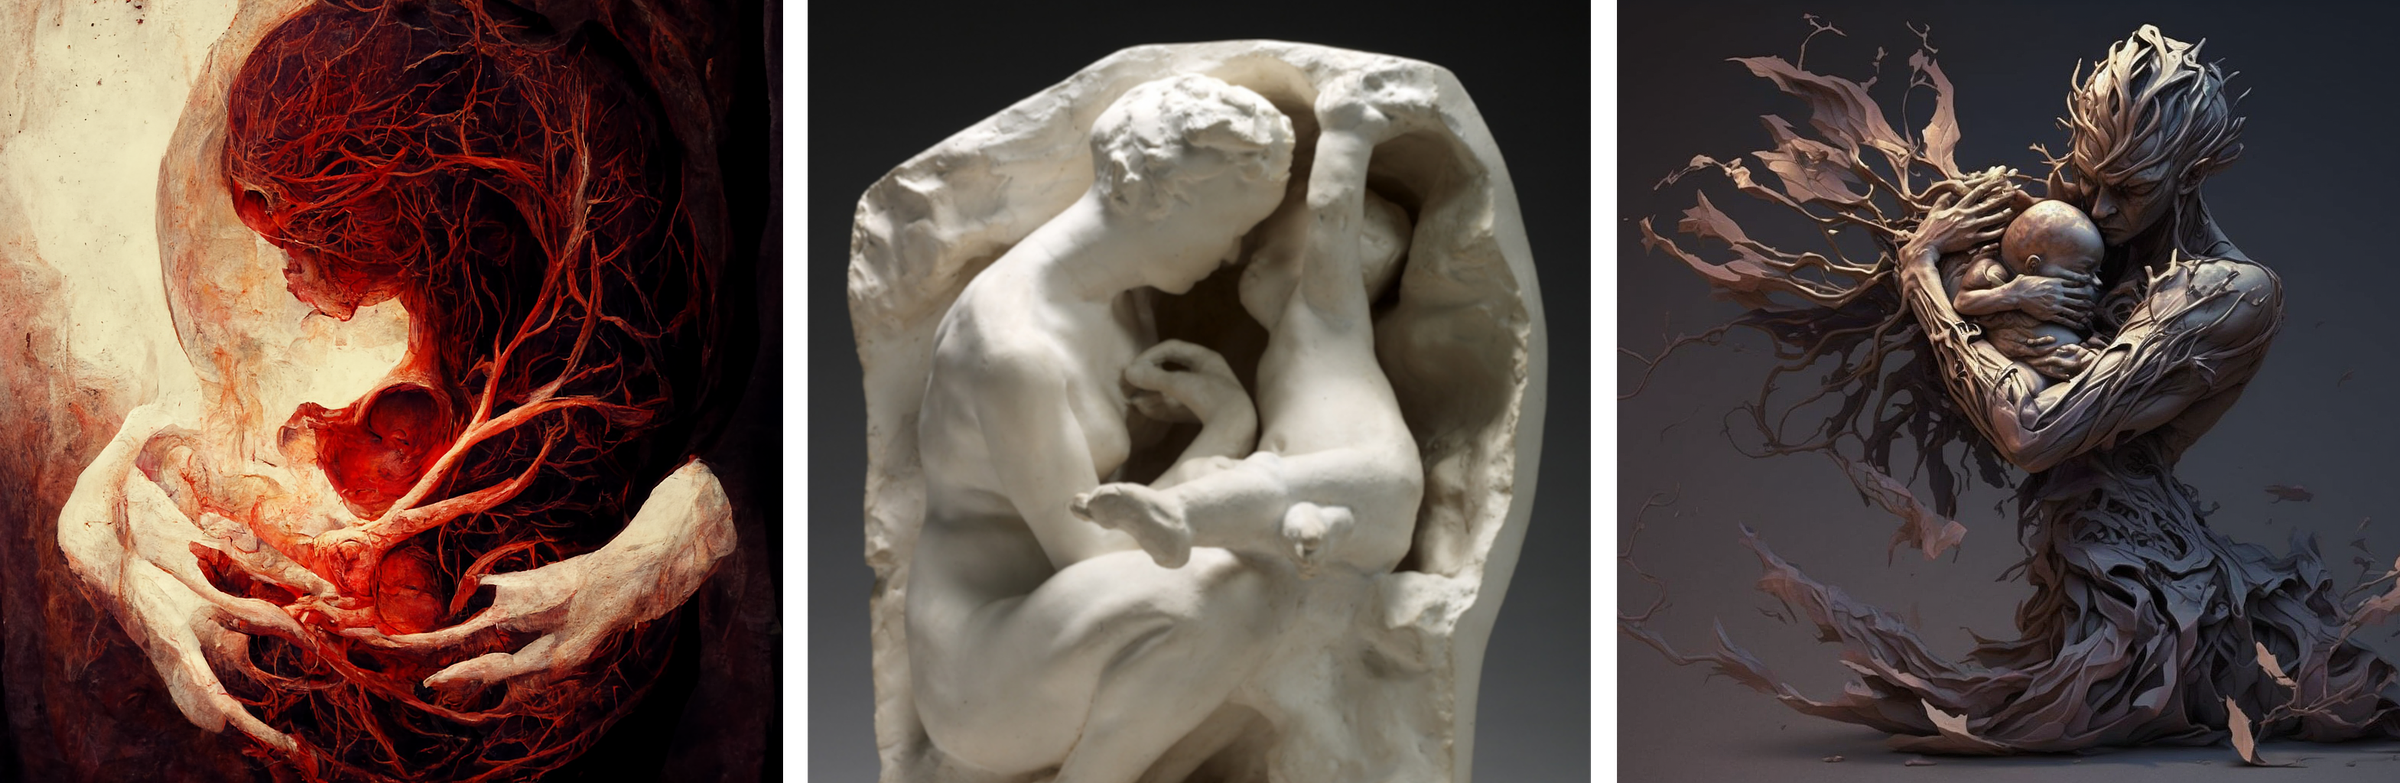 1) Miele: an illustration of two pale, fleshy objects that resemble hands below a large, branching, arterial mass that evokes an internal view of a womb or fetus. It looks as though it may have been drawn by hand with colored pencil, or painted with watercolor. 2) Rodin: a plaster sculpture of a crouching woman with a baby resting on her knees. One of her hands is held up, bent toward her chest. Both mother and child are framed by and partially enveloped in a cave mouth, and they are looking into it. The child is leaning toward and into the cave. 3) A highly stylized illustration of a woman holding a baby in her arms, close to her chest. She looks down to its head and nuzzles it. She is made of large leaves or seaweed being lifted and blown to the side by wind, with a branch-like texture on her arms and head. From the waist down, her body becomes more loosely defined and seems to be more a mass of leaves than human. This mass is truncated below where her buttocks would be, and she rests on the floor.